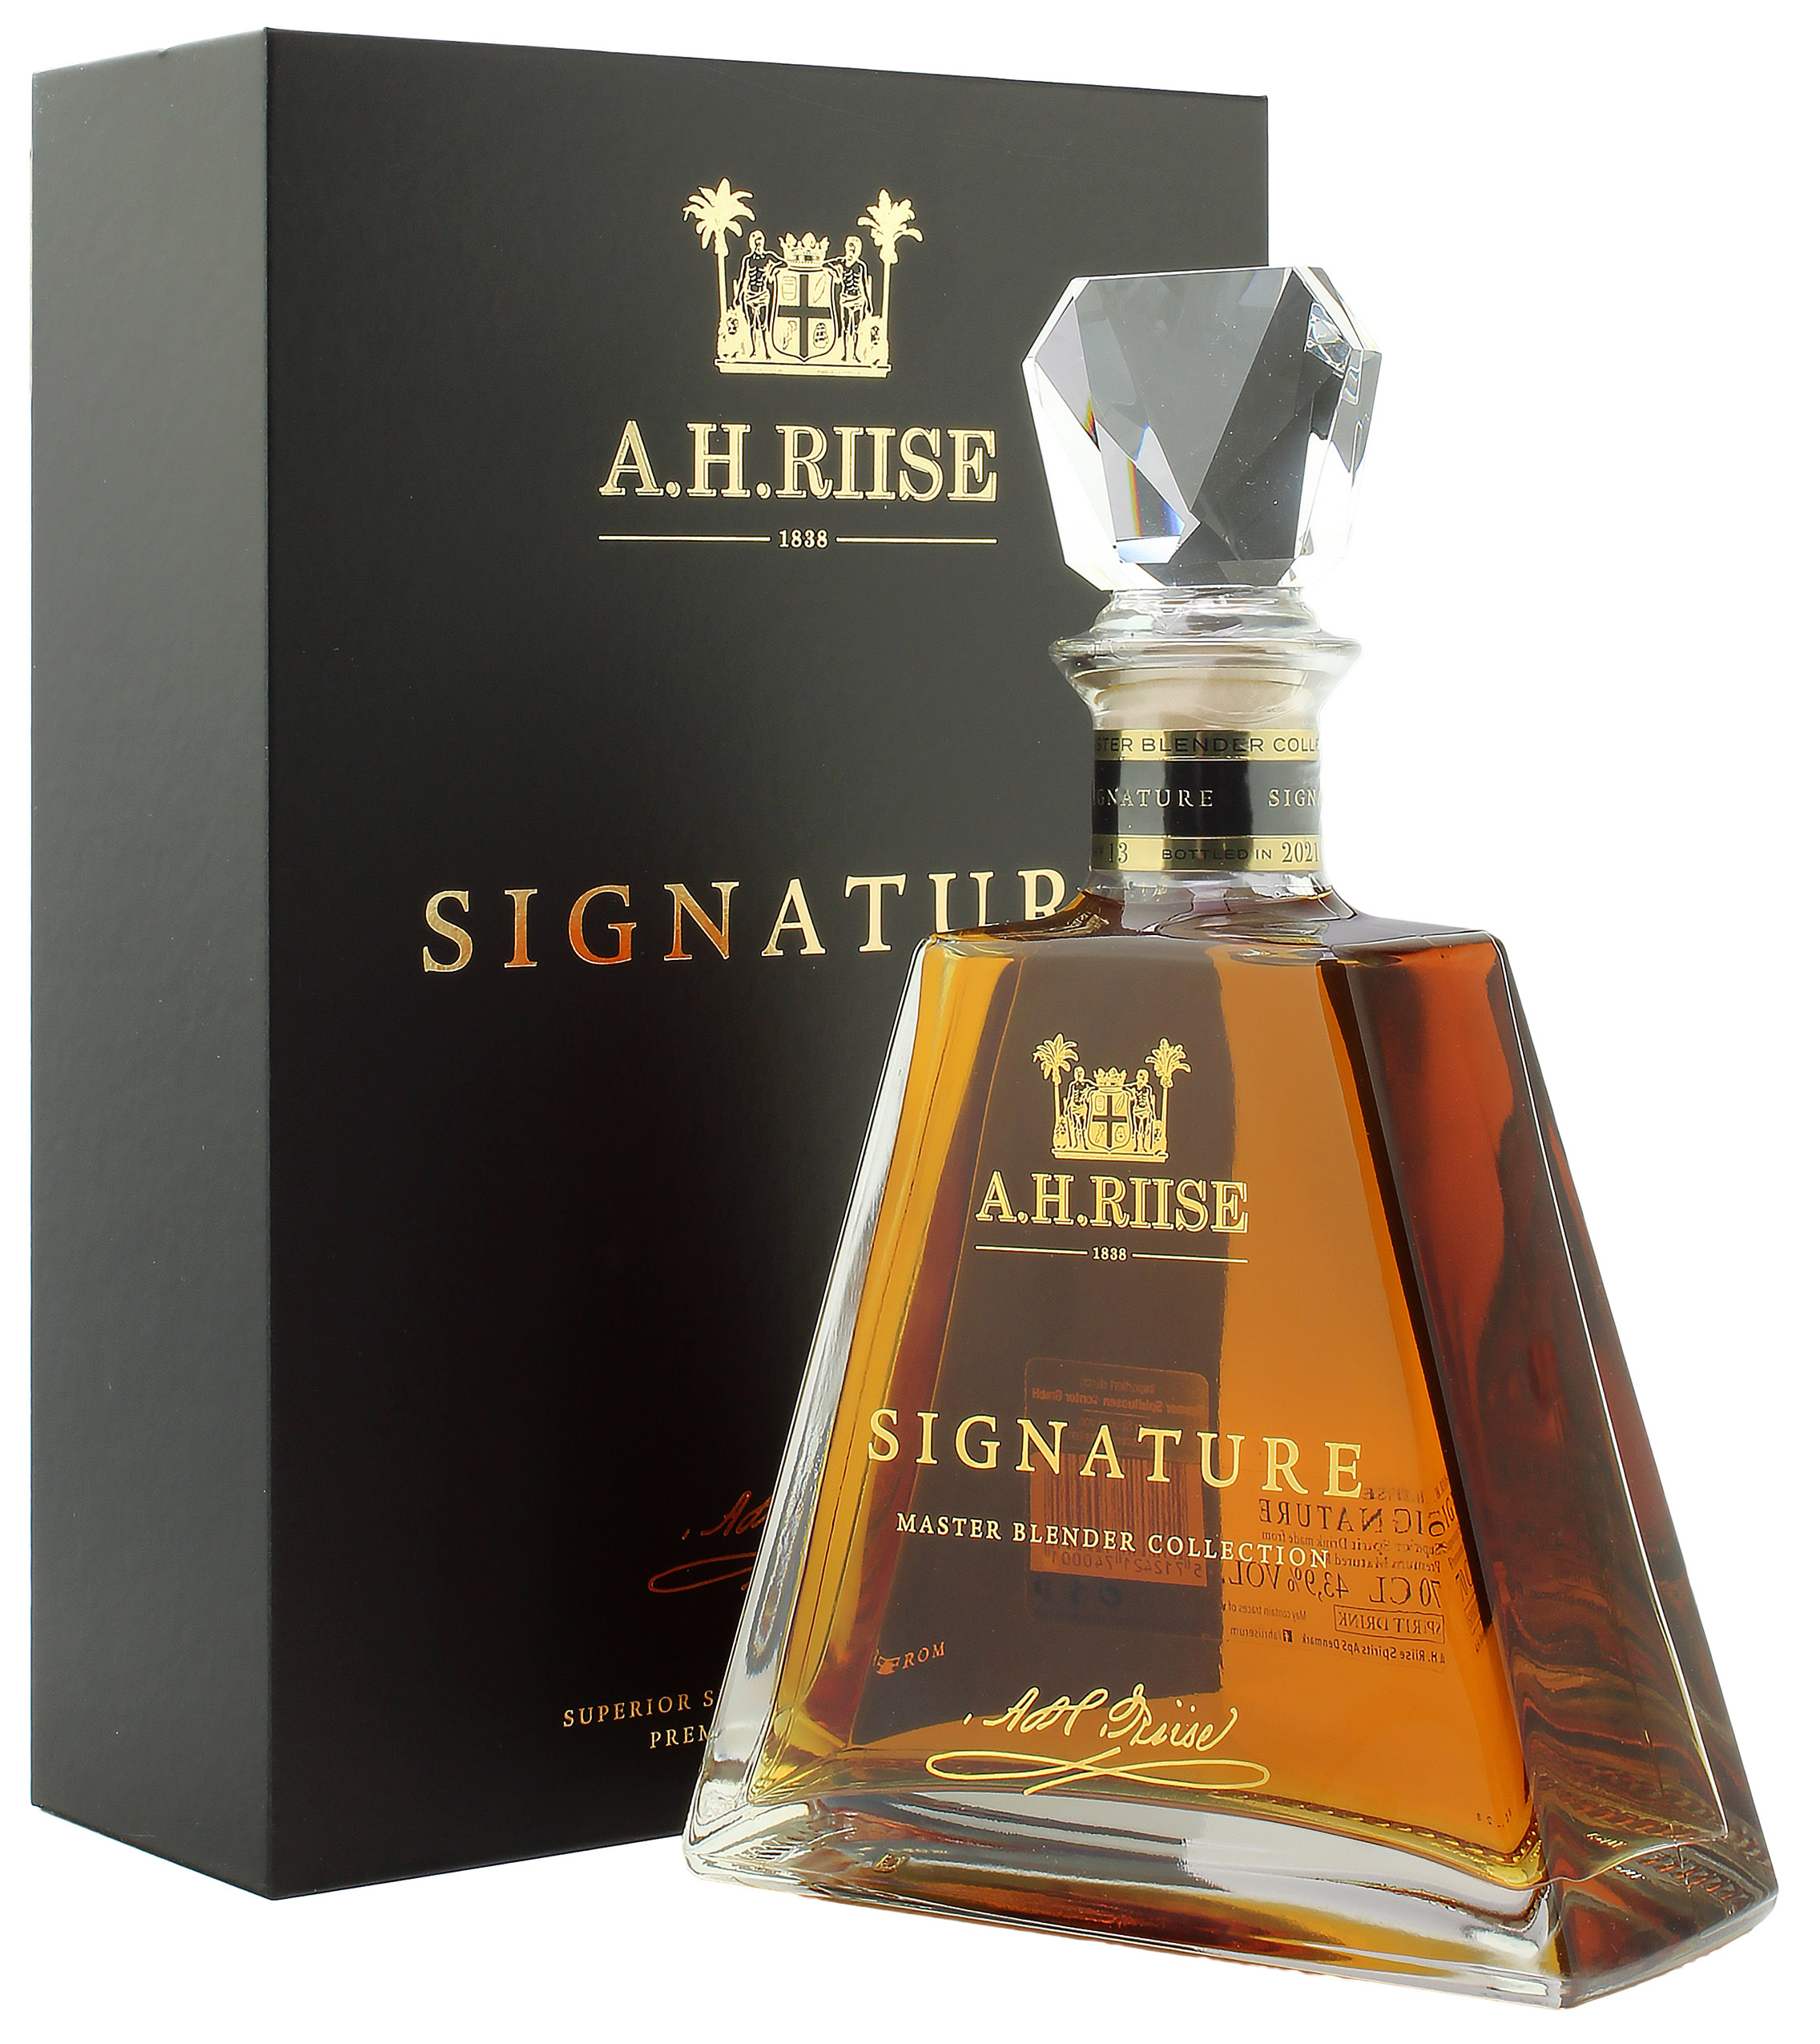 A.H. Riise Signature Master Blender Collection 43.9% 0,7l